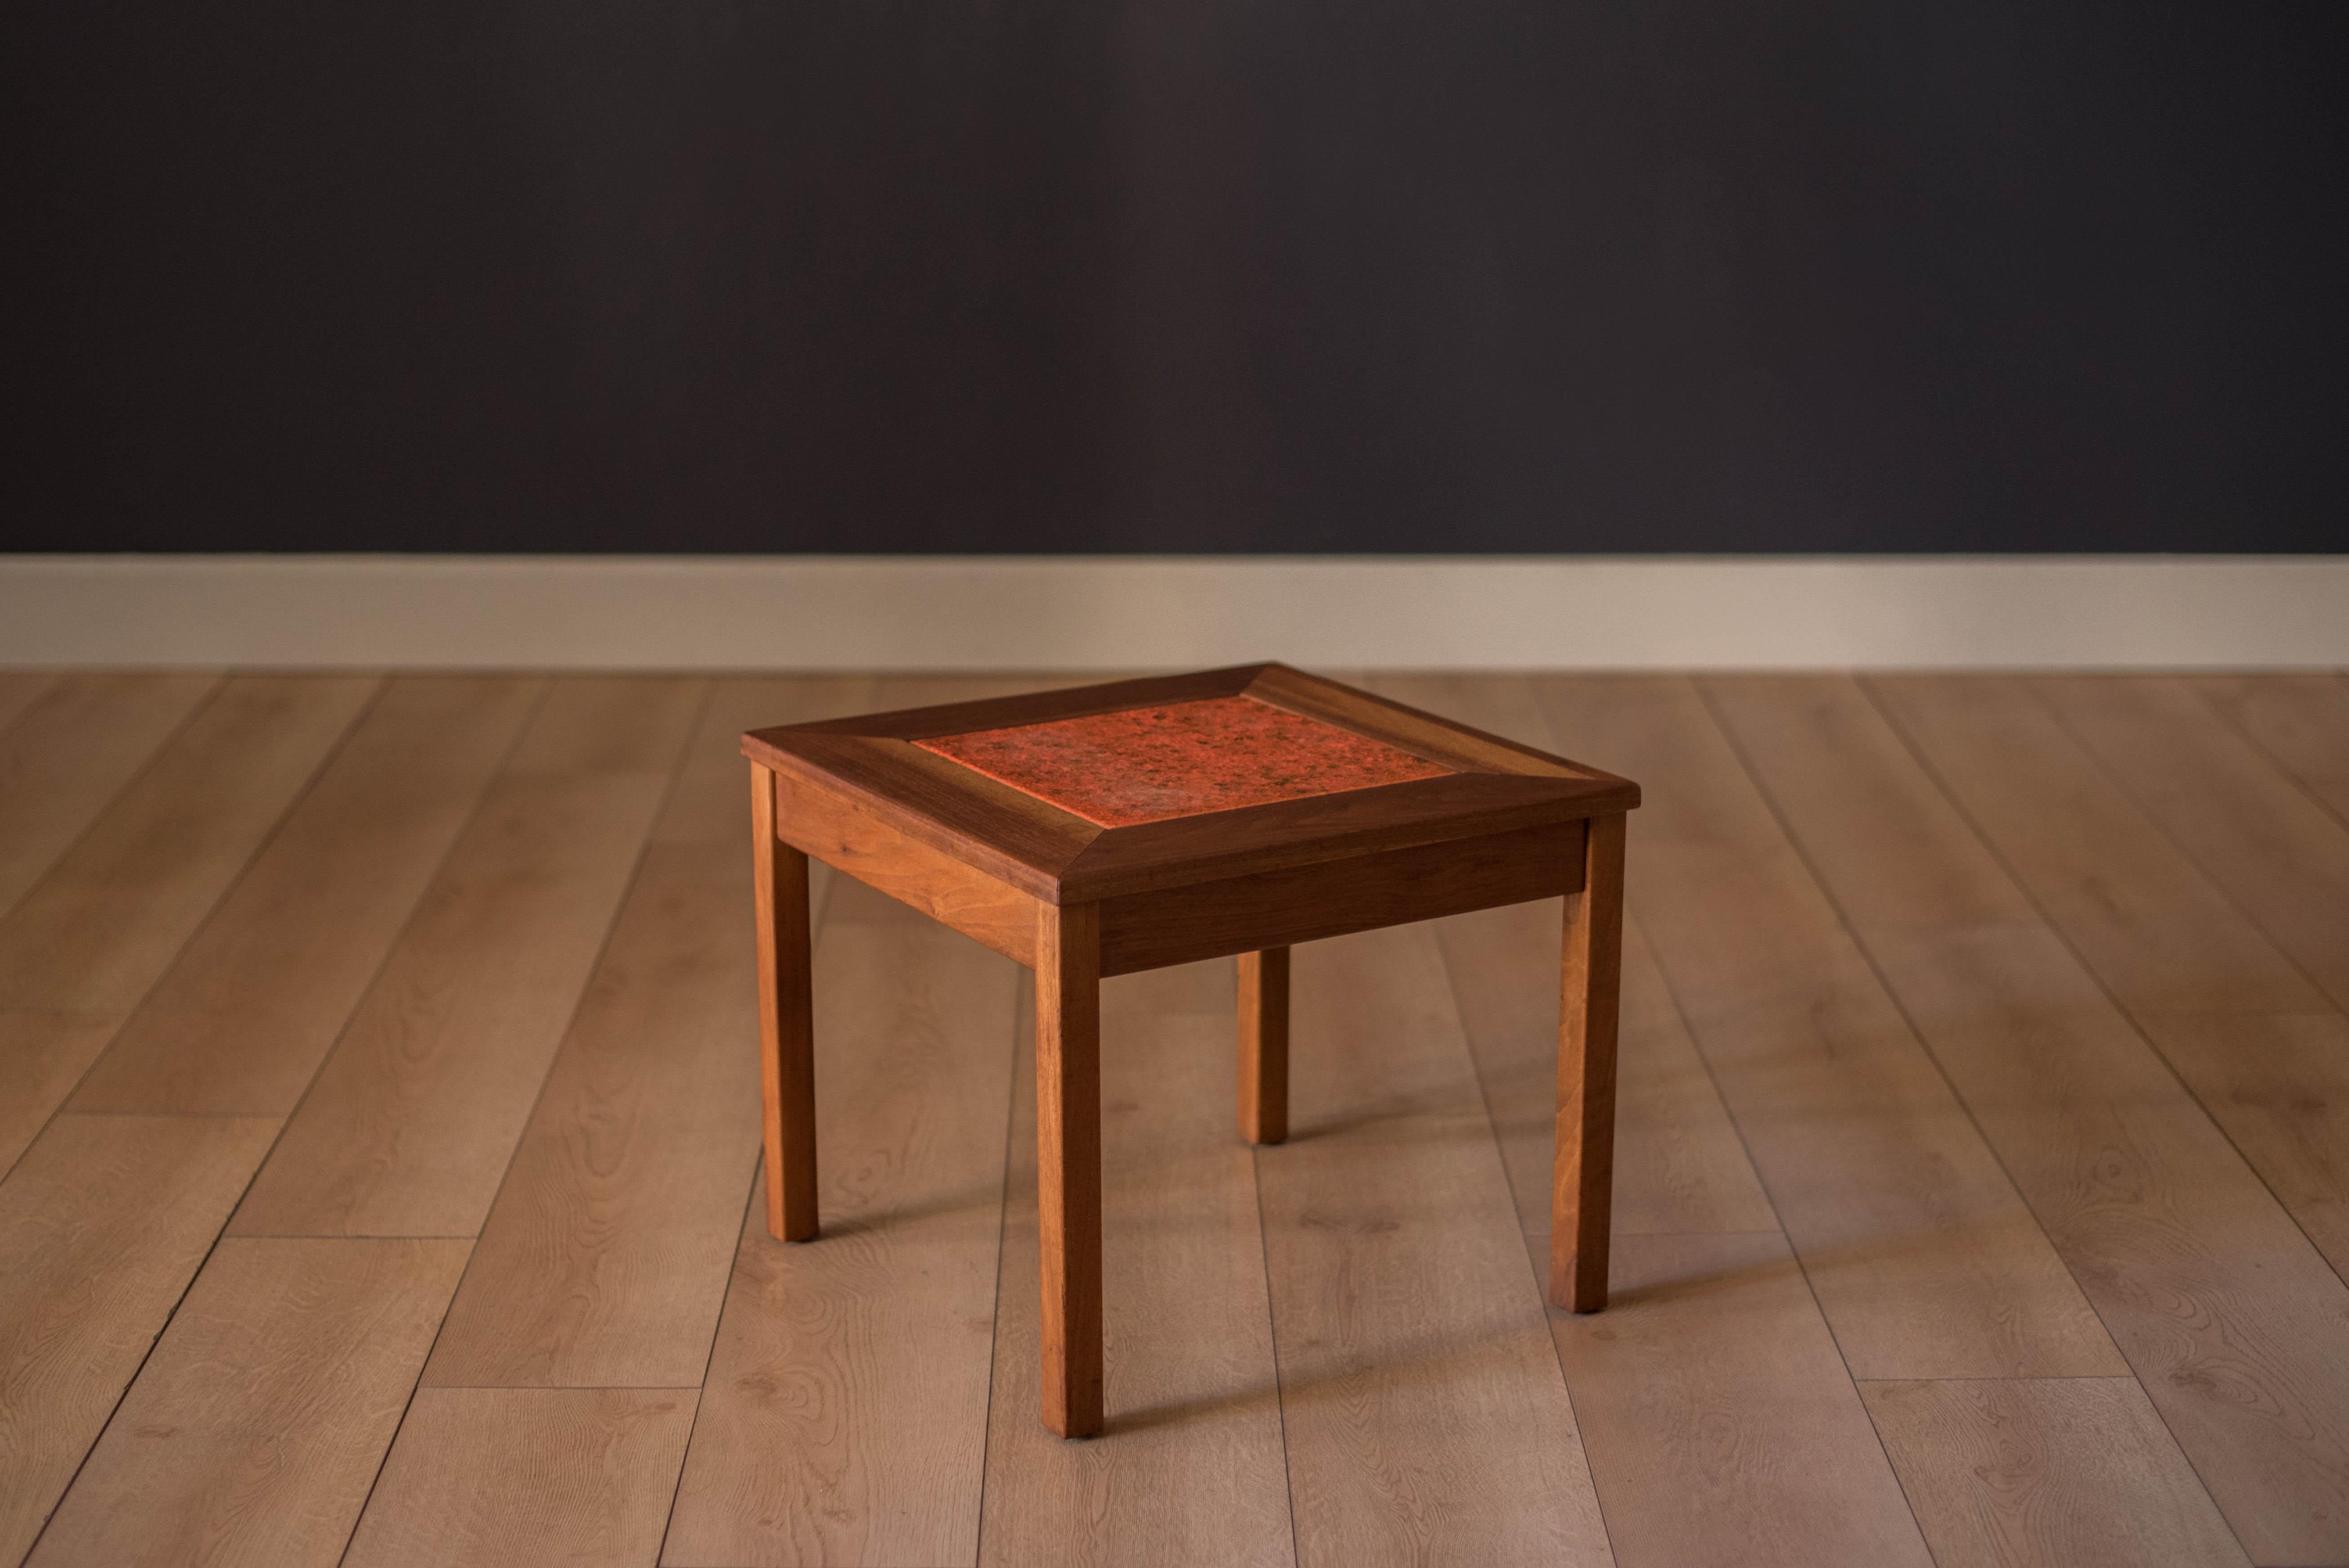 Vintage walnut side table designed by John Keal for Brown Saltman of California. This piece showcases an enameled glazed orange tile insert made out of copper. Perfect to use as a drink table or plant stand that provides a durable and easy to